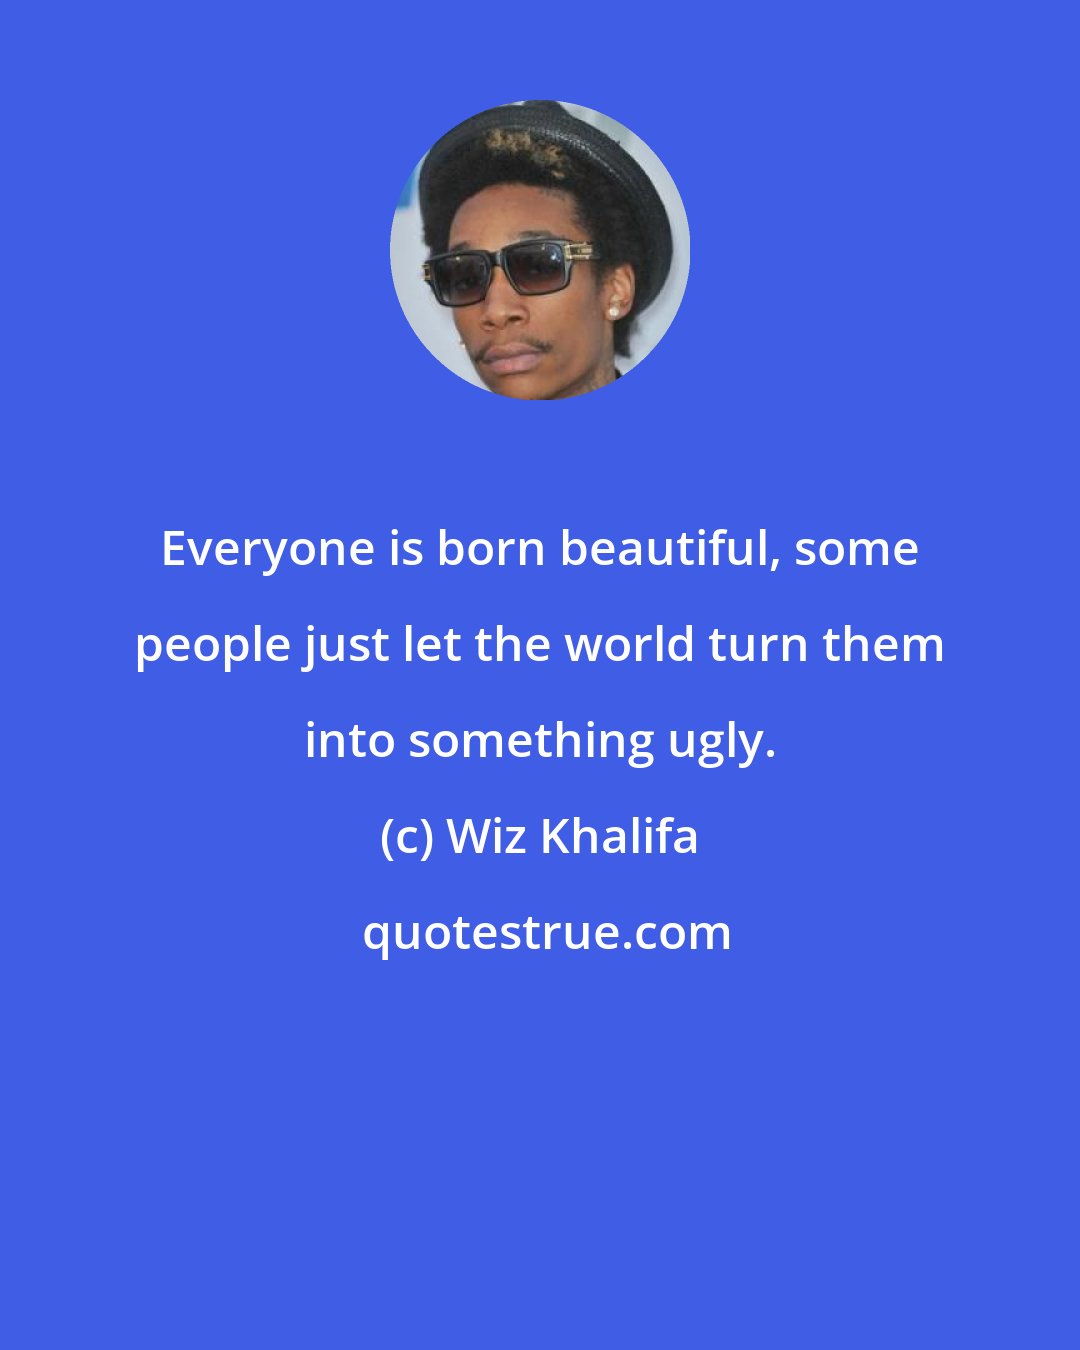 Wiz Khalifa: Everyone is born beautiful, some people just let the world turn them into something ugly.